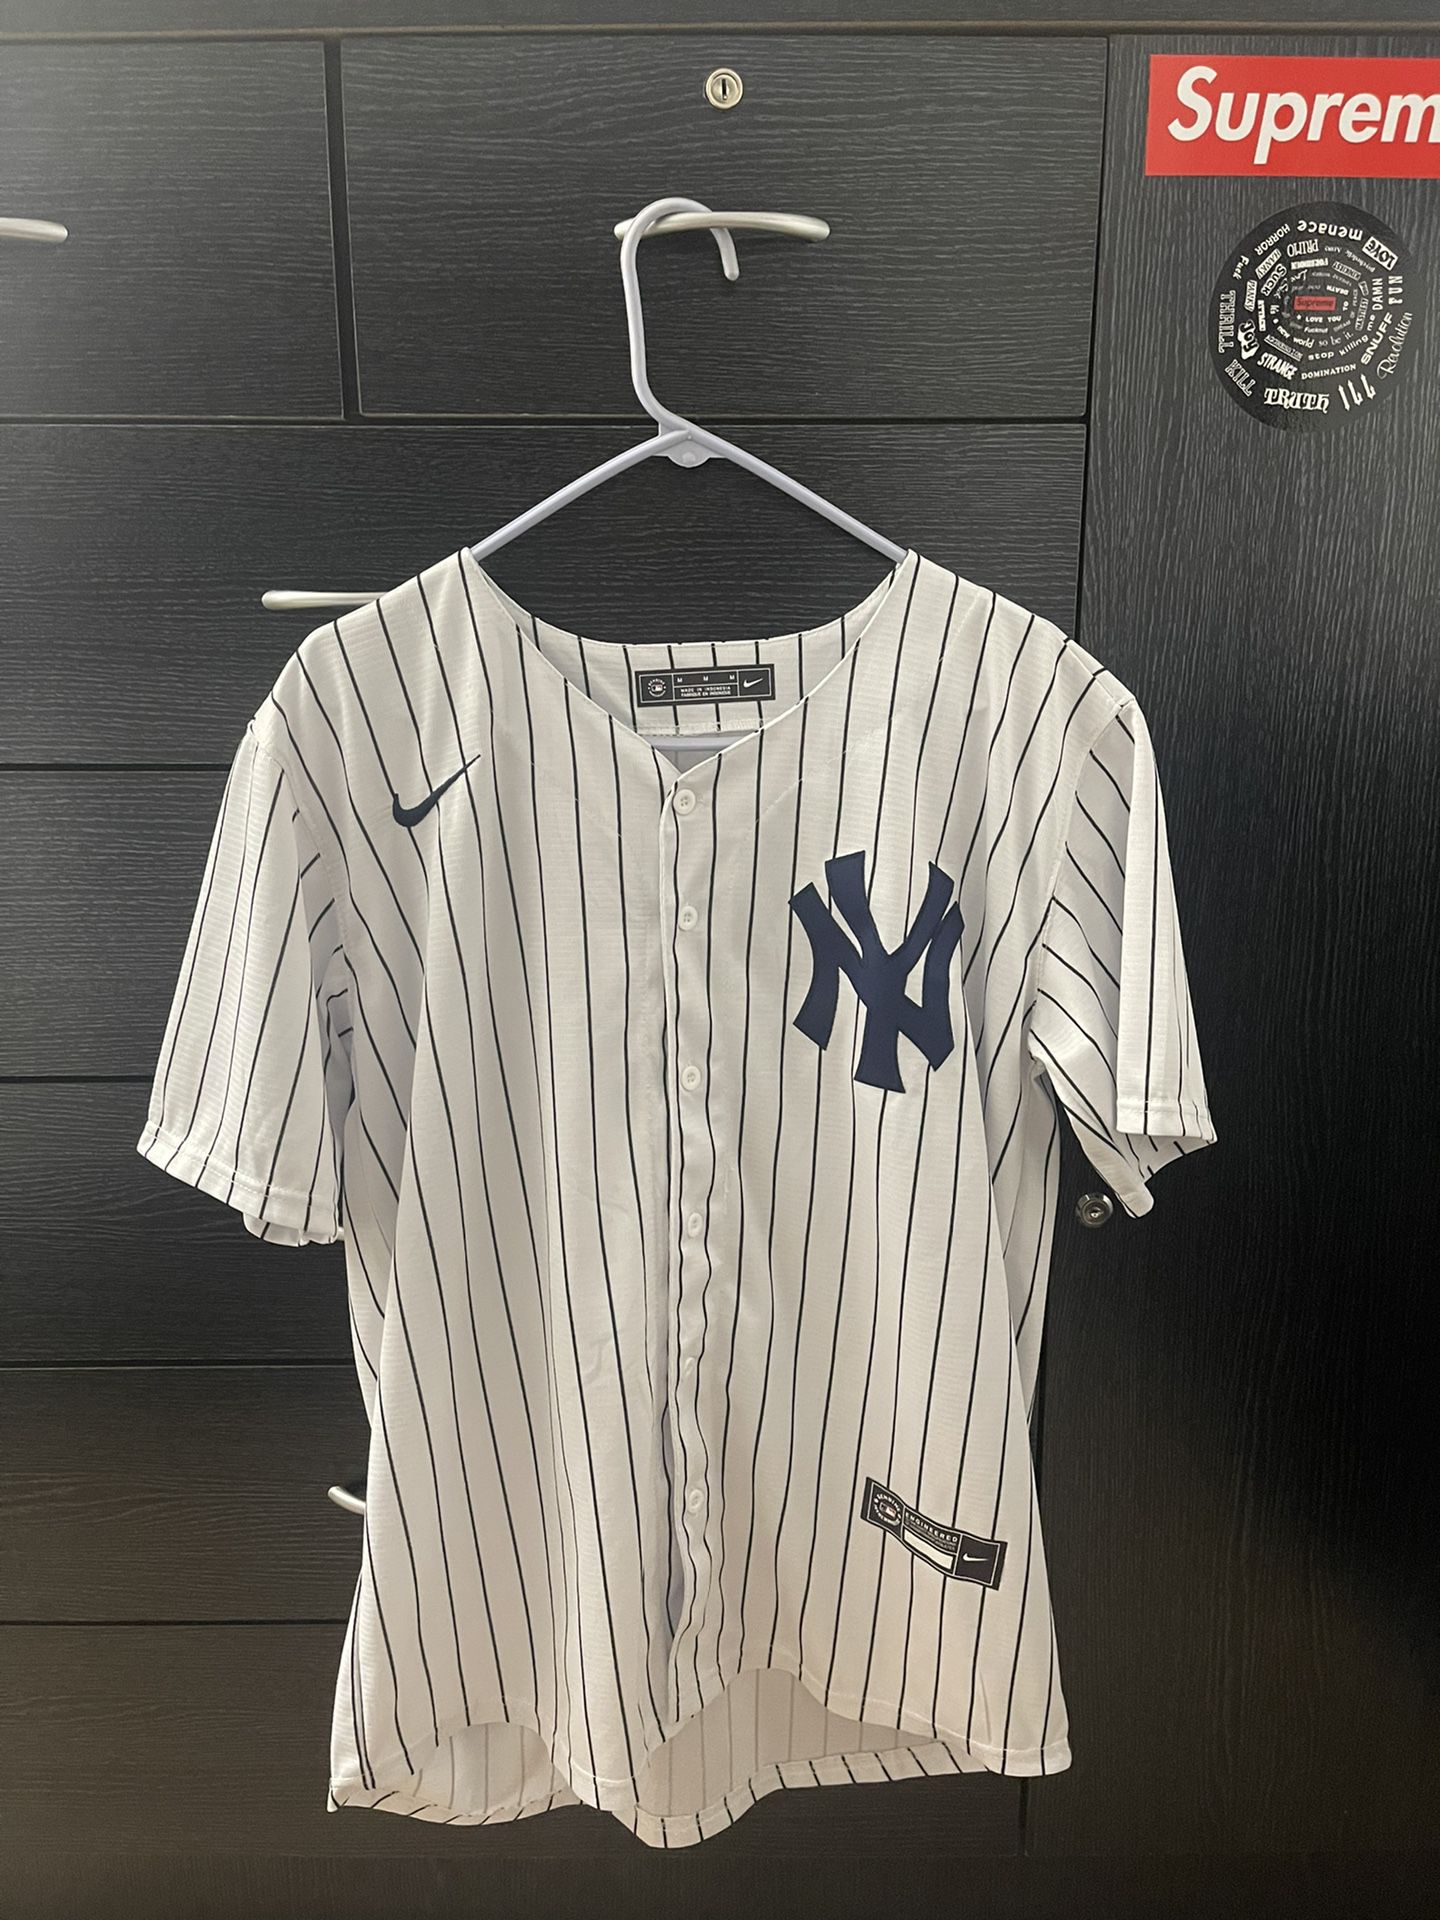 New York Yankees Derek Jeter Jersey for Sale in East Northport, NY